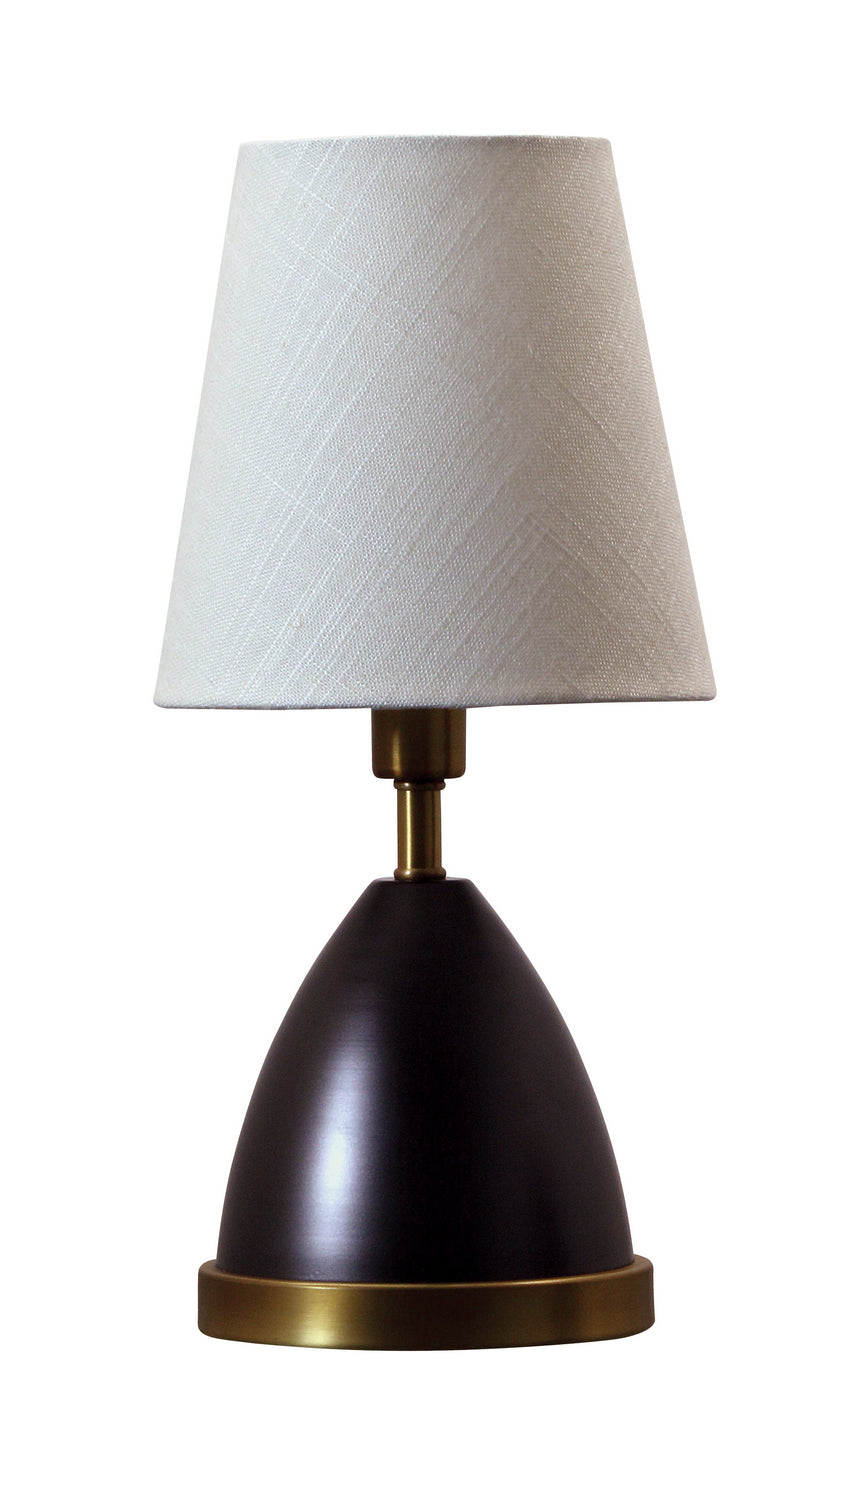 House of Troy - GEO211 - One Light Table Lamp - Geo - Mahogany Bronze With Weathered Brass Accents